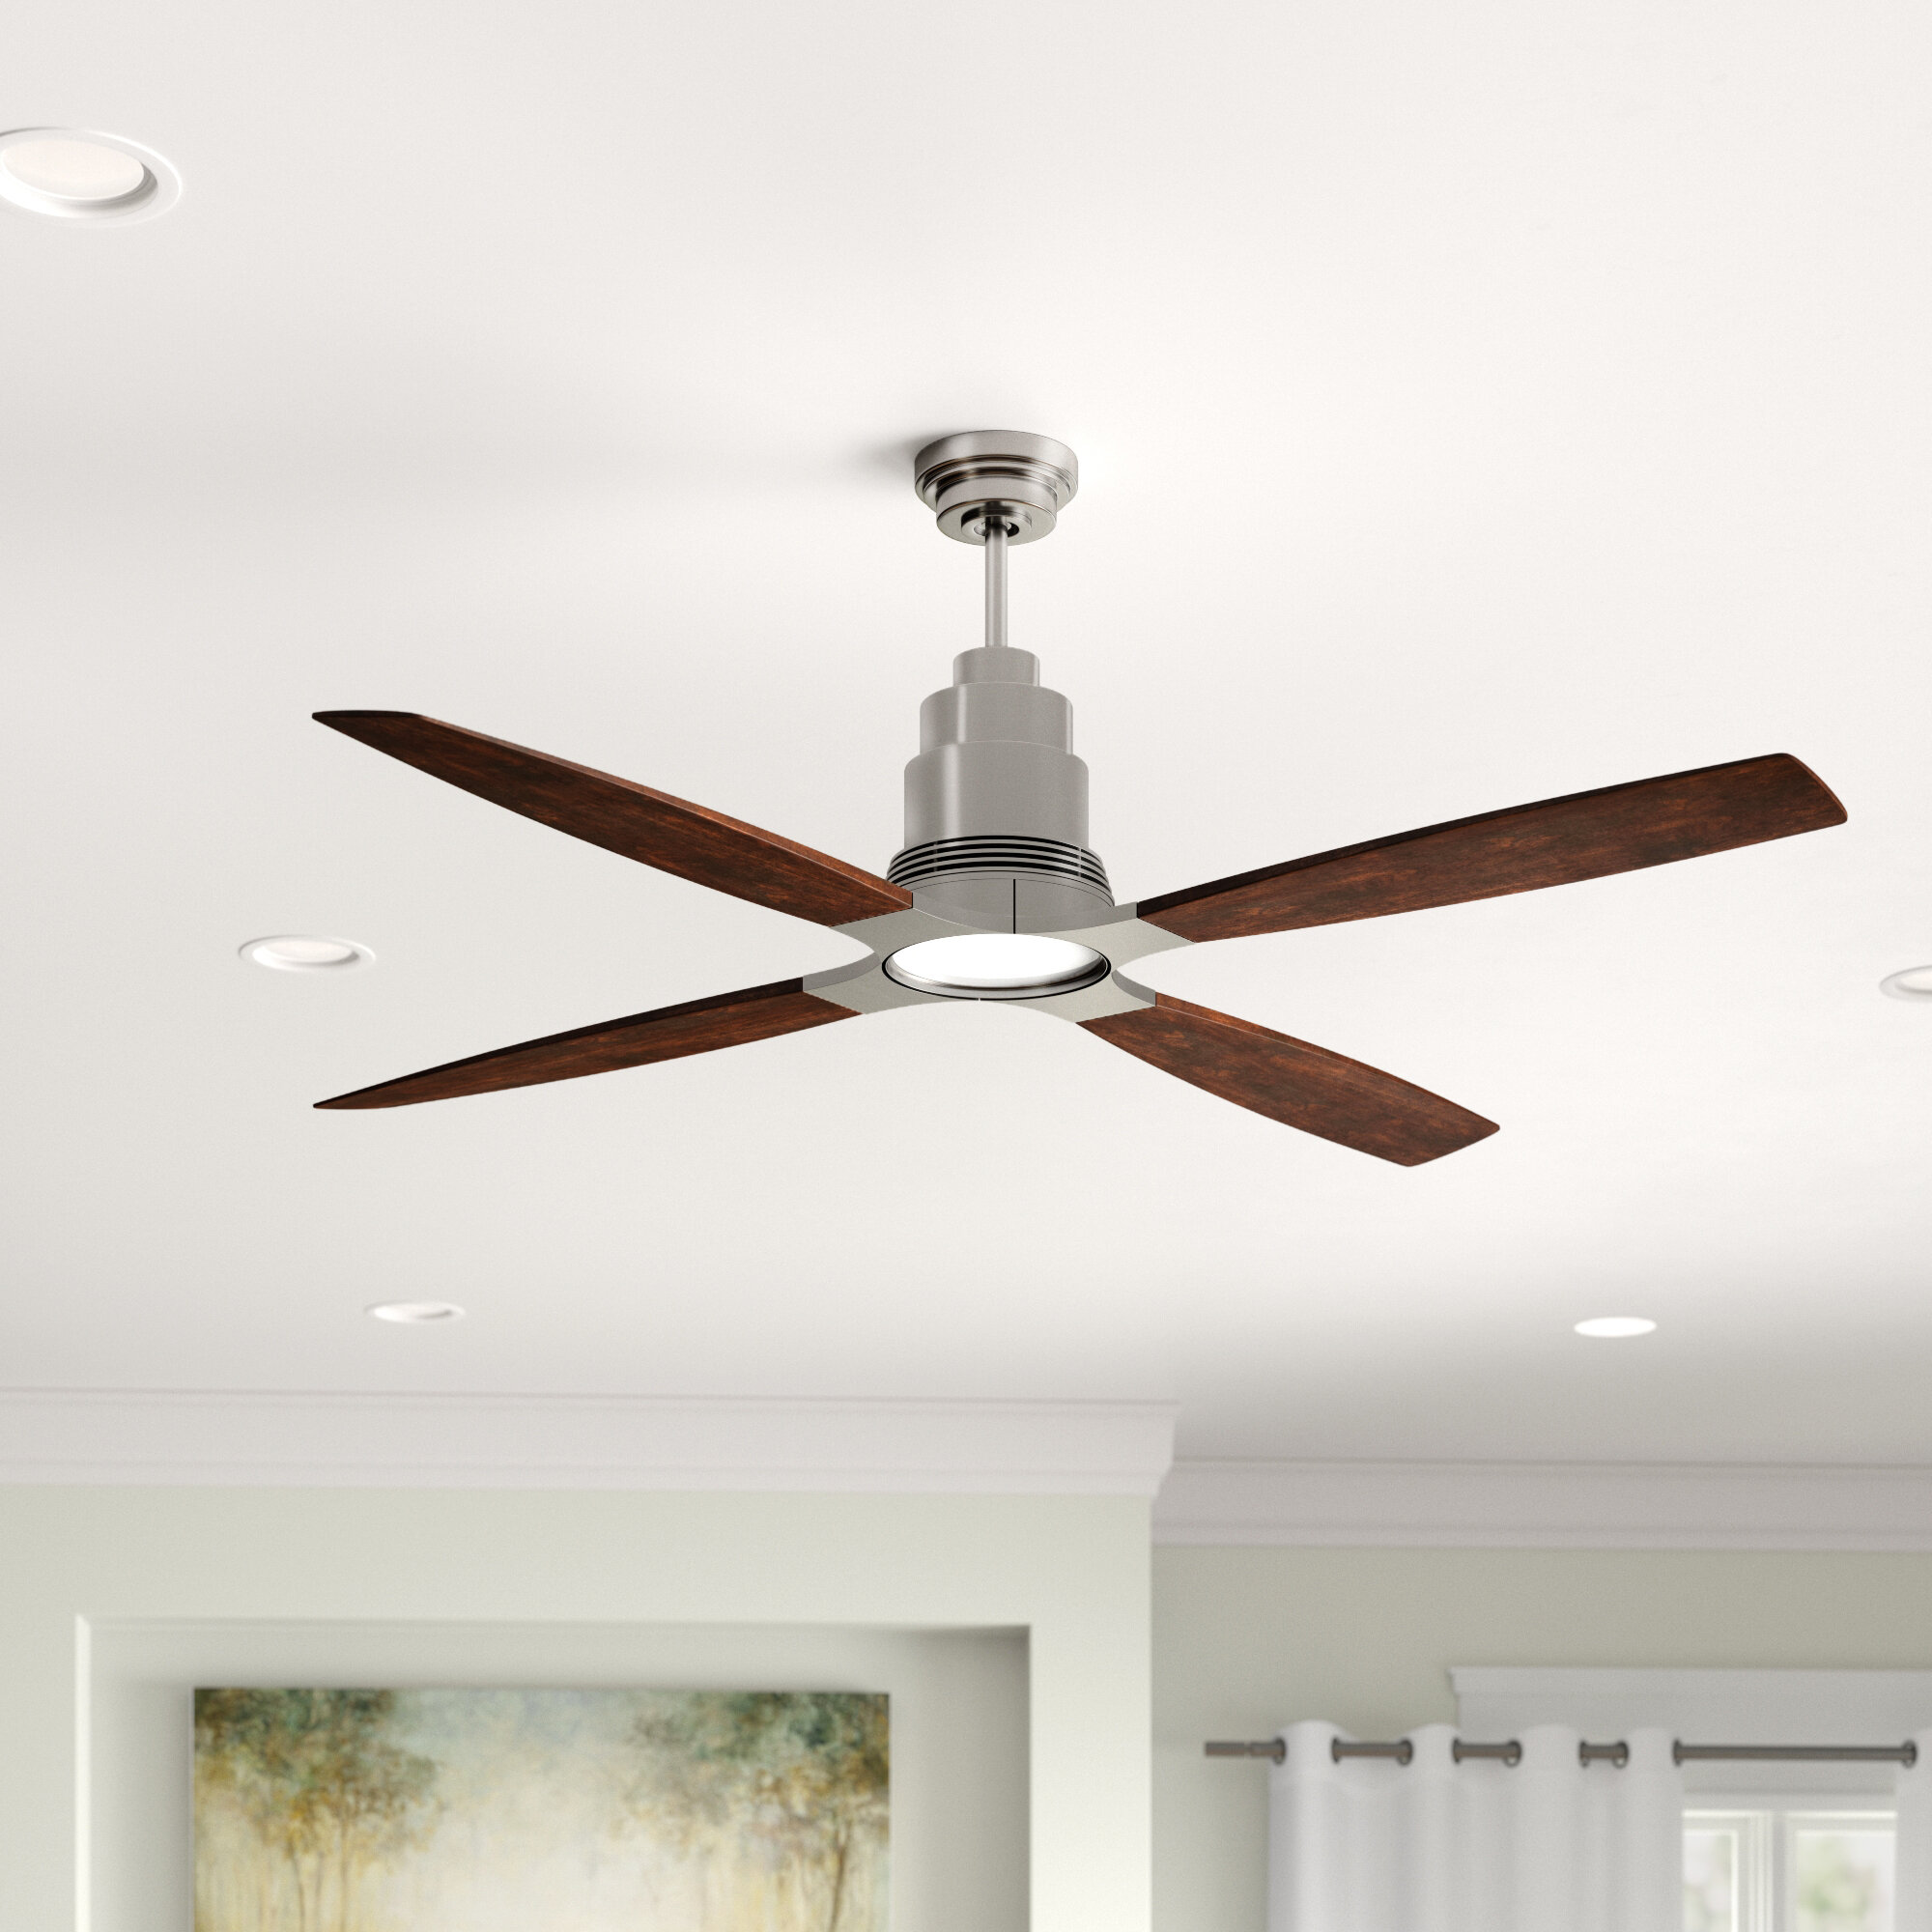 Red Barrel Studio 60 Gulianna 4 Blade Led Propeller Ceiling Fan With Wall Control And Light Kit Included Reviews Wayfair